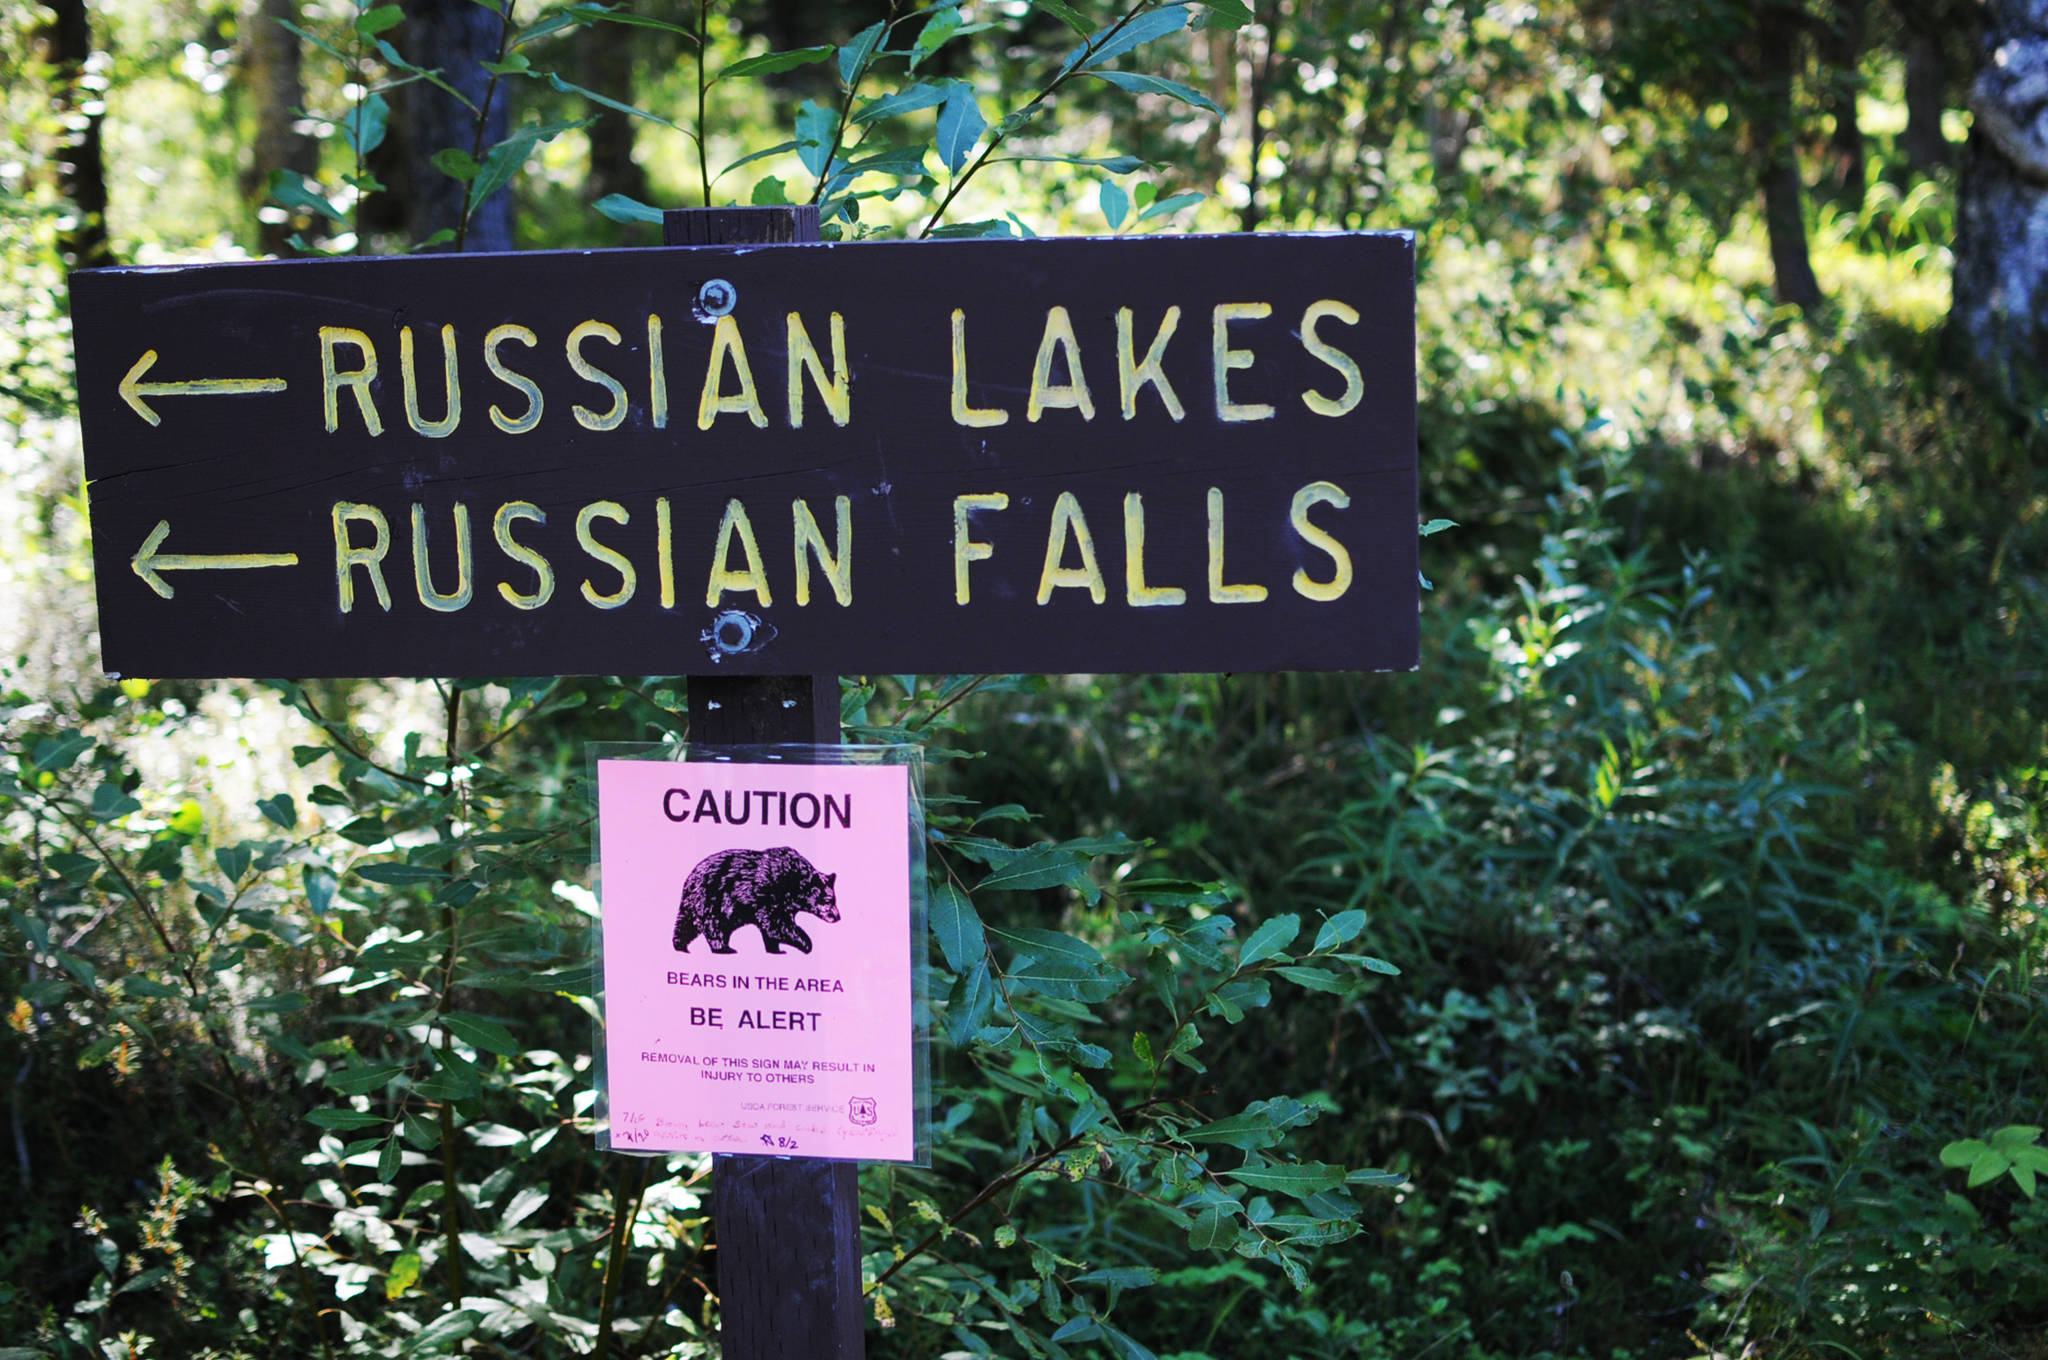 A sign warns visitors about a recent bear sighting near the Russian River on Sunday, Aug. 6, 2017 near Cooper Landing, Alaska. Bears frequent the area, a highly productive sockeye salmon fishery and one of the most popular sportfisheries in the state. (Photo by Elizabeth Earl/Peninsula Clarion, file)